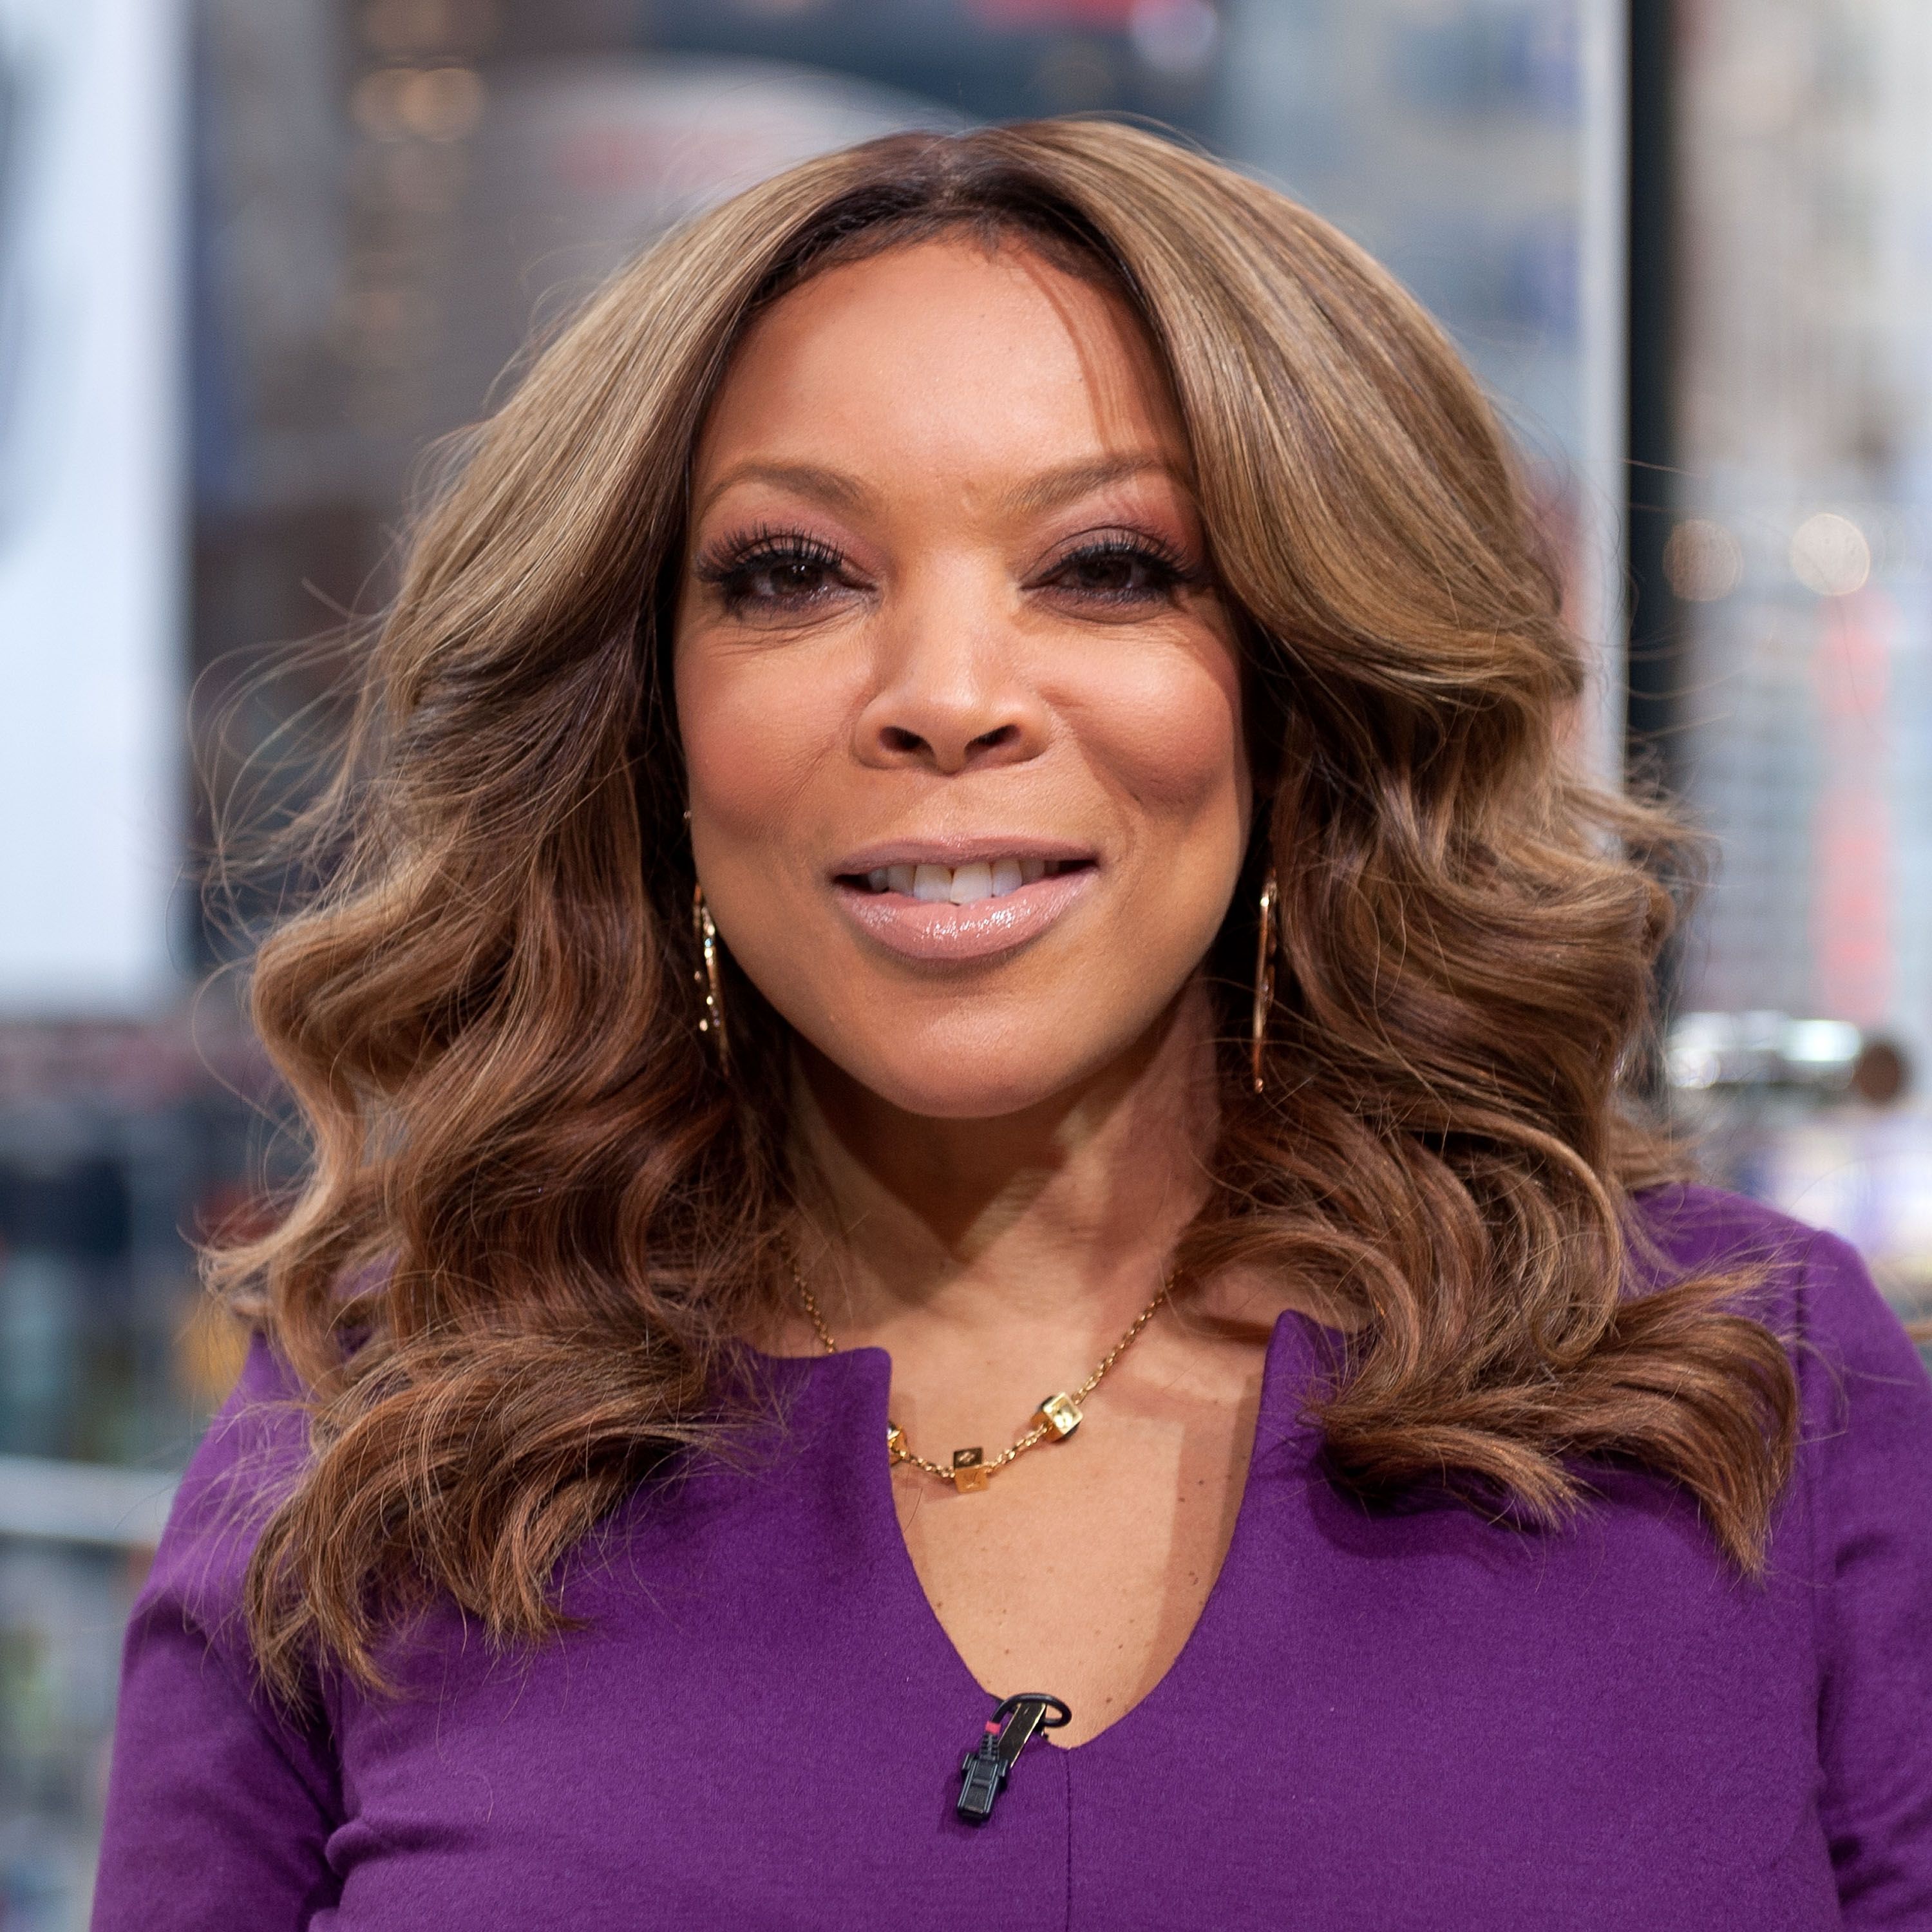 Wendy Williams visits "Extra" at their studio at H&M in Times Square on January 21, 2015 in New York City. | Photo: Getty Images.